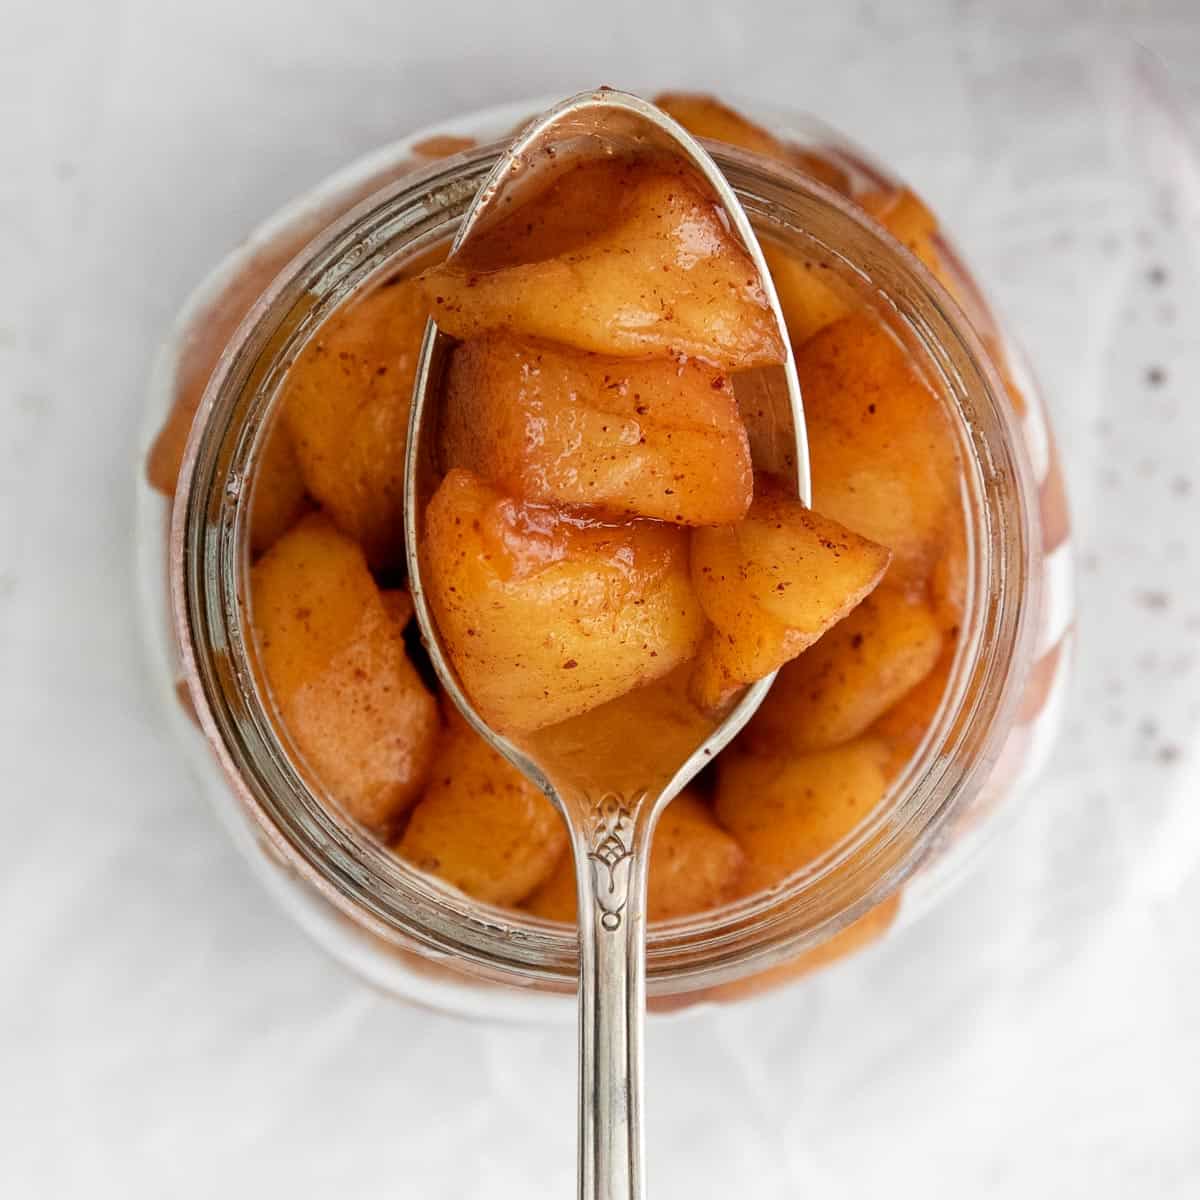 A spoonful of apple compote over a jar of compote